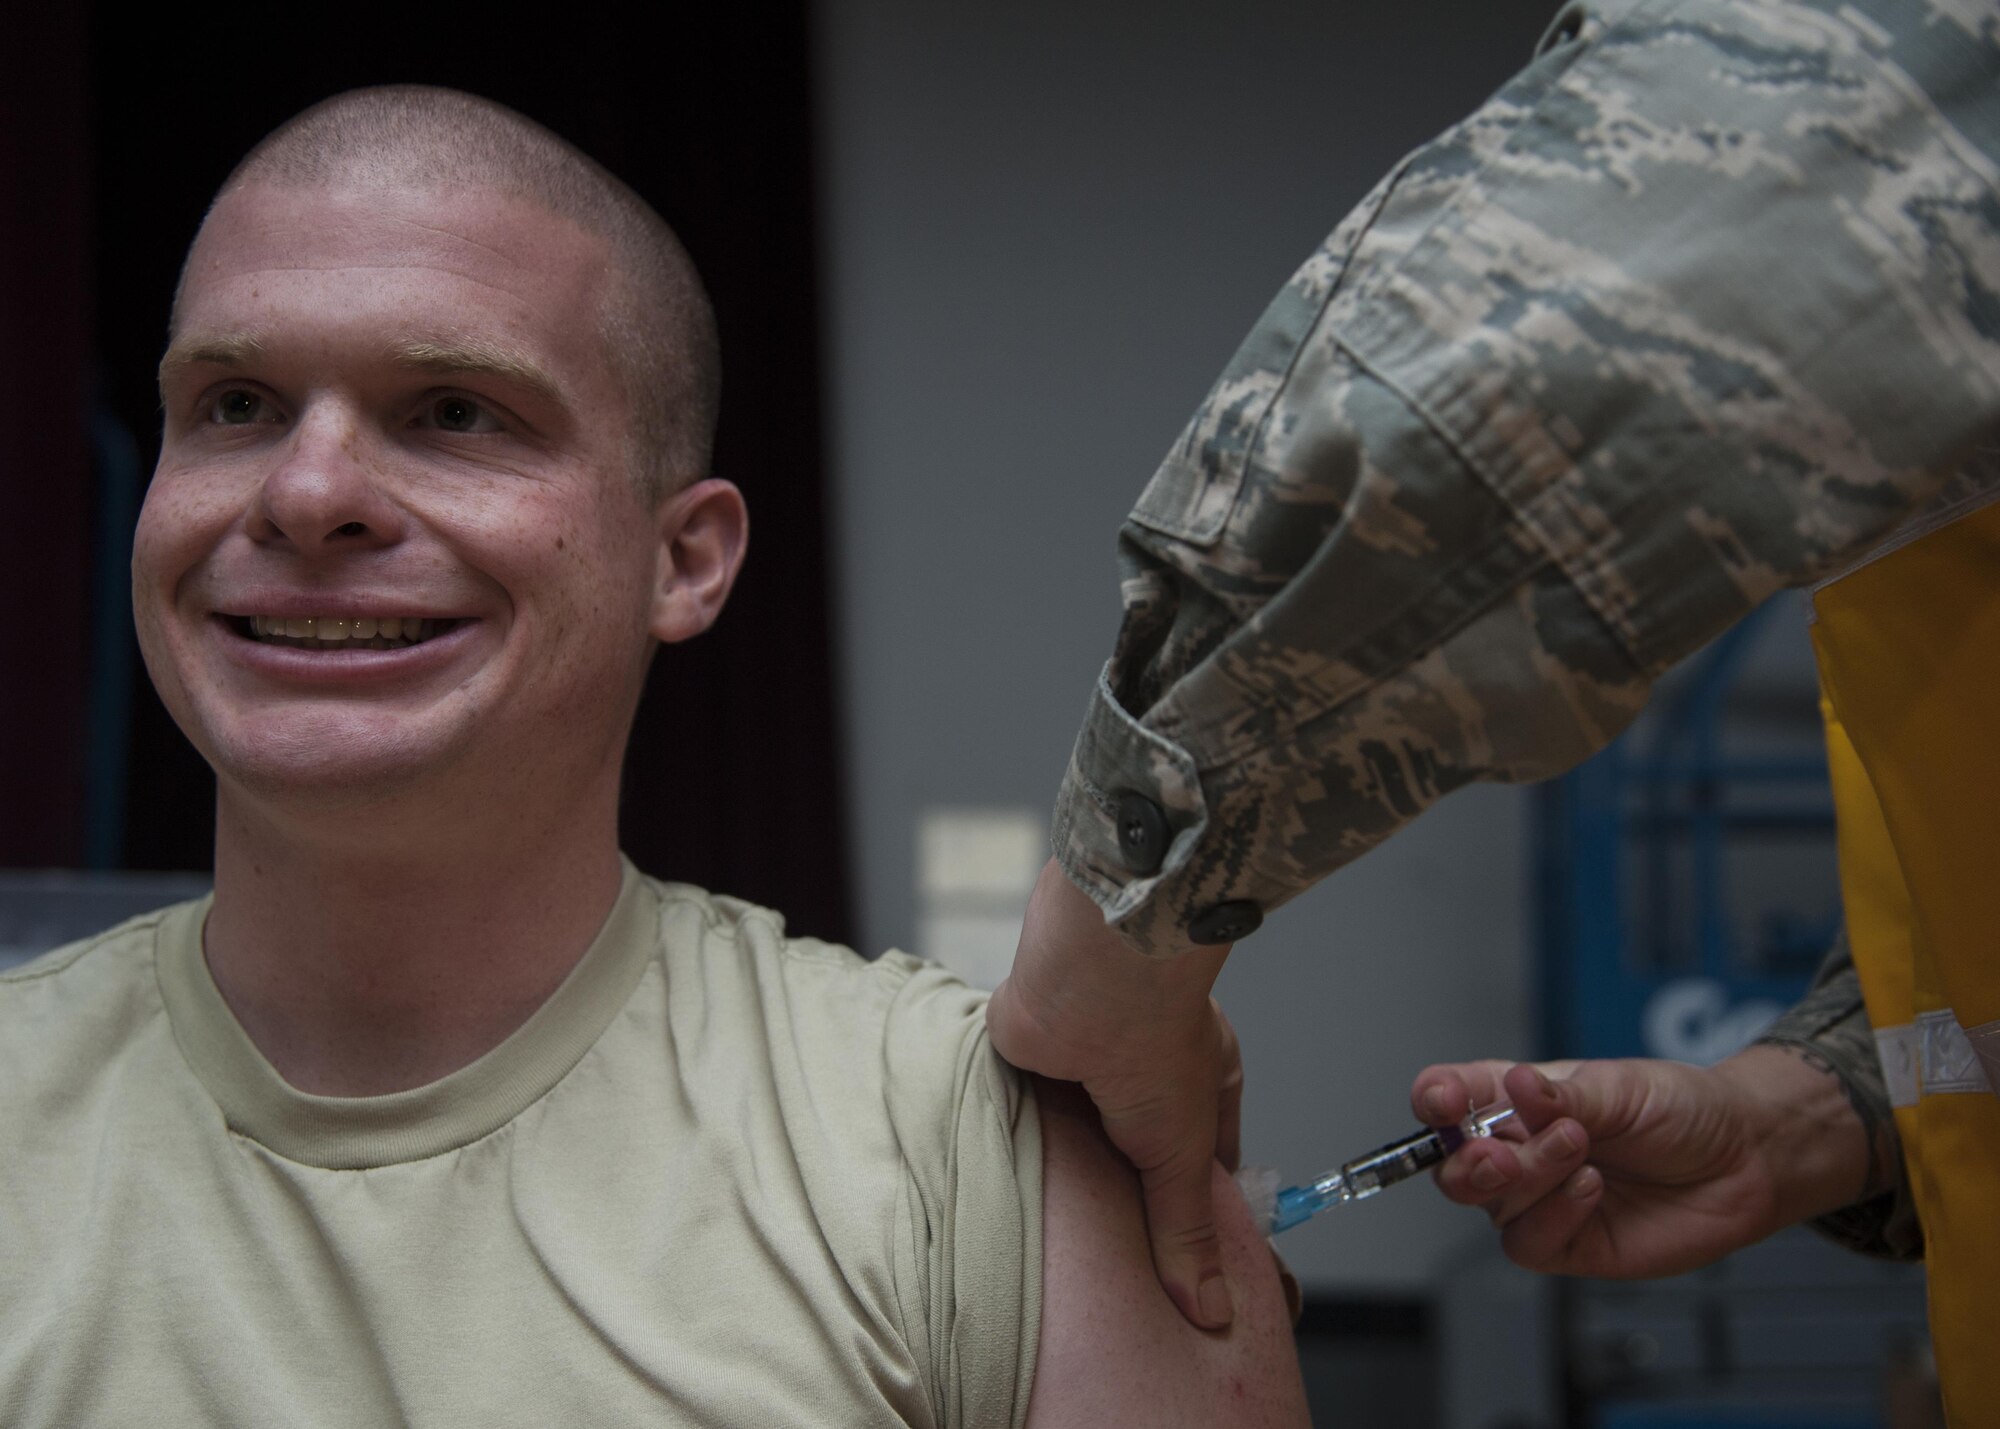 U.S. Air Force Staff Sgt. Noah Dudley, 377th Logistics Readiness Squadron vehicle operator, receives the flu vaccination at Kirtland Air Force Base, N.M., Oct. 24. It takes two weeks for protection to develop after vaccination. (U.S. Air Force photo by Staff Sgt. J.D. Strong II)